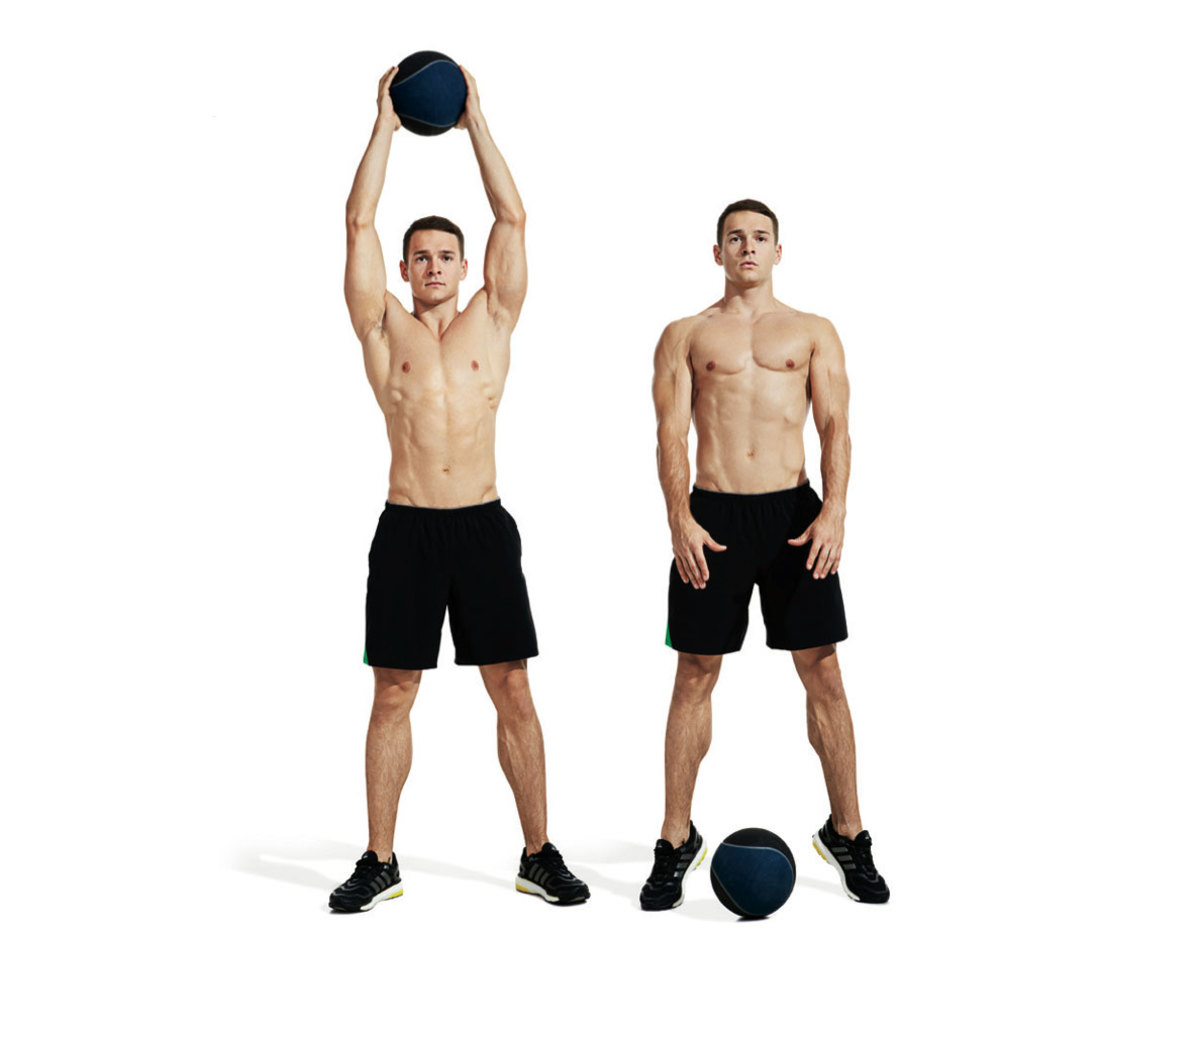 Medicine Ball Ab Workout: Russian Twist, Plank, Crunch, and More